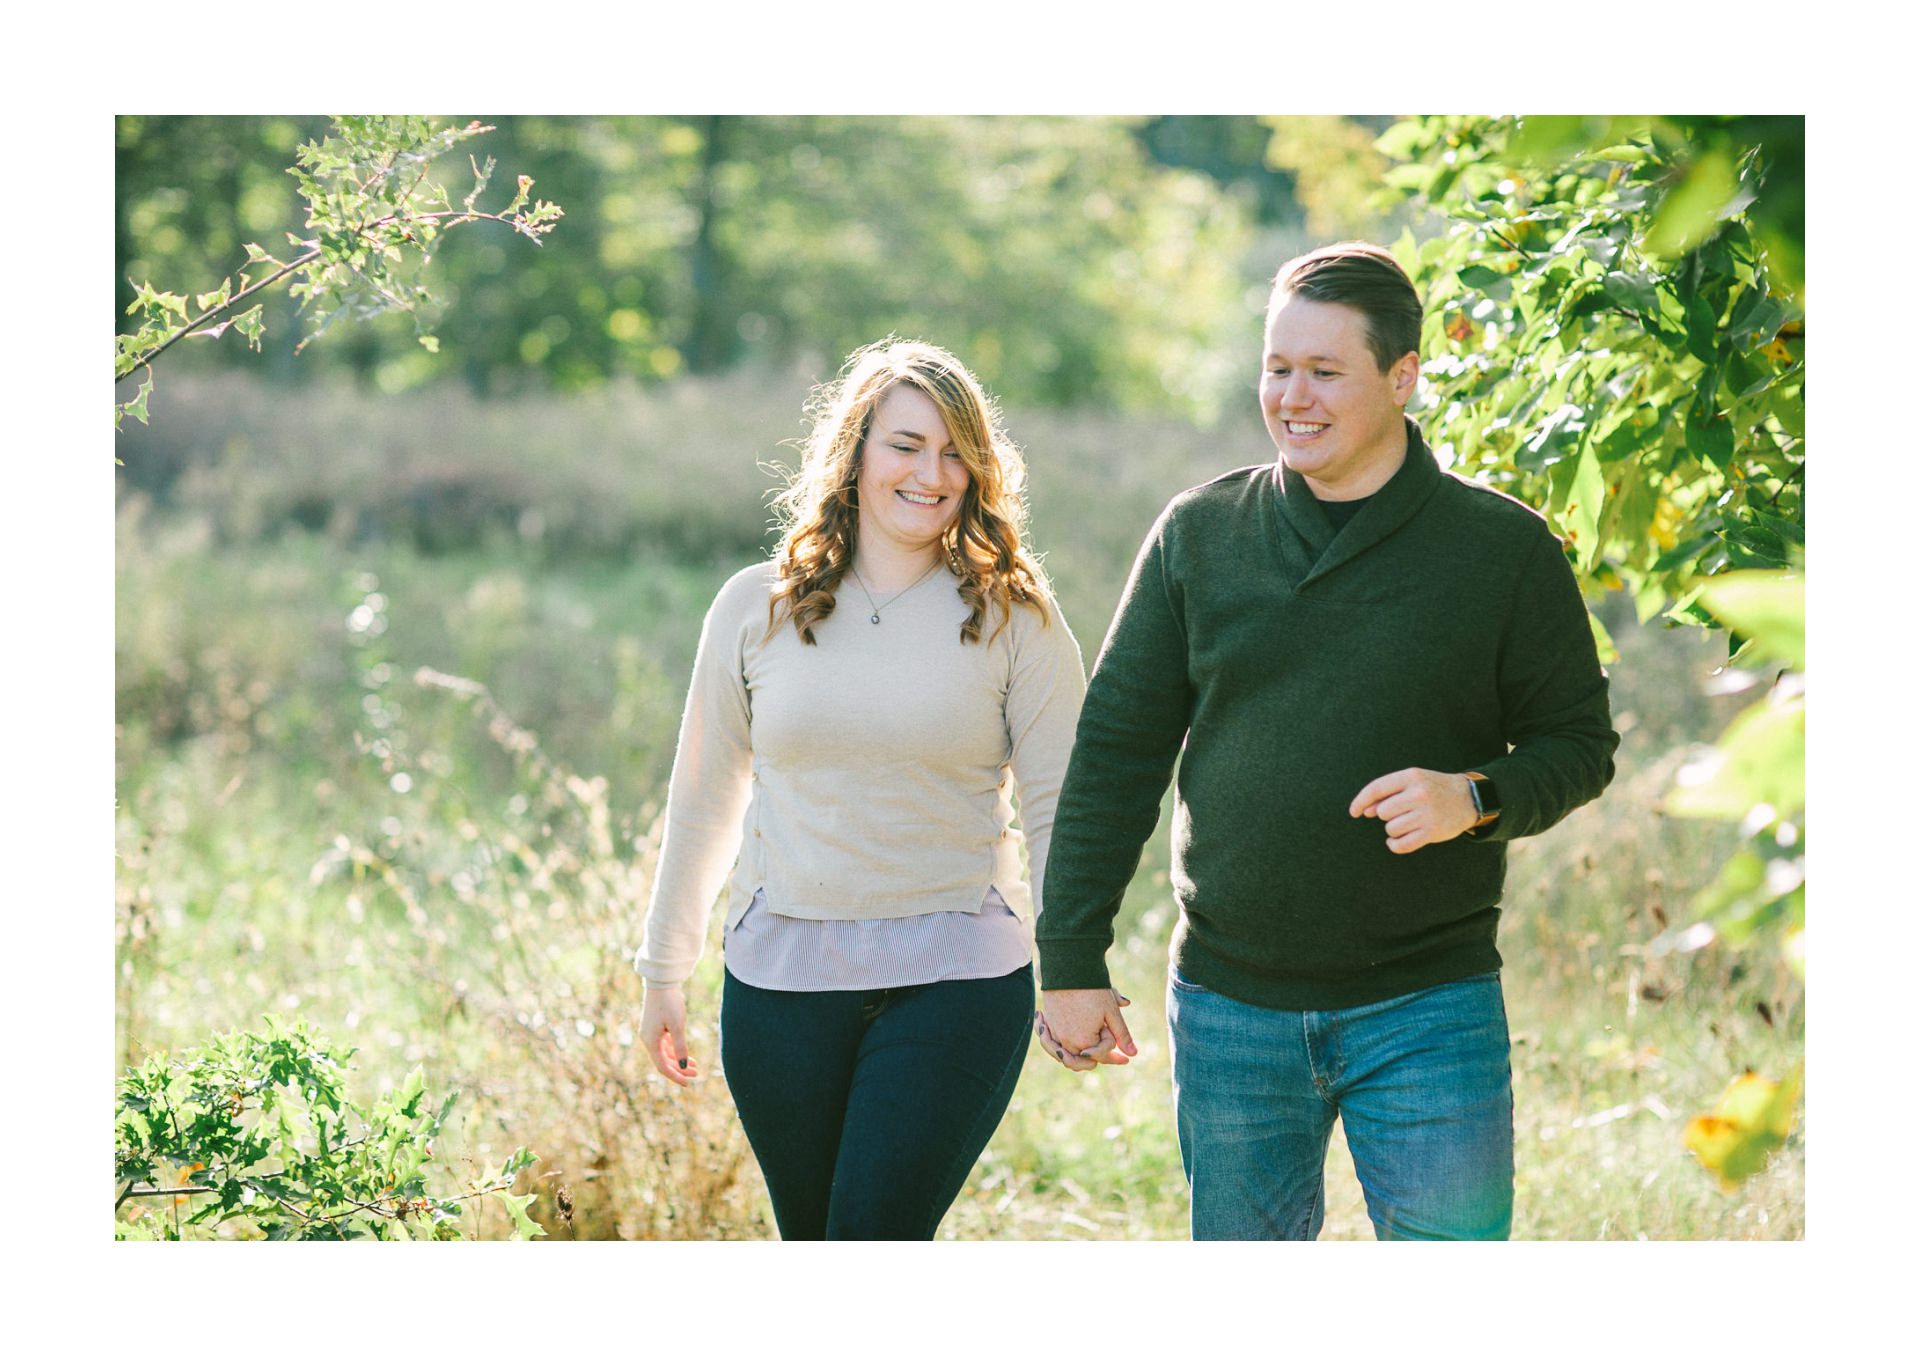 Cleveland Fall Engagement Session at Pattersons Fruit Farm 4.jpg